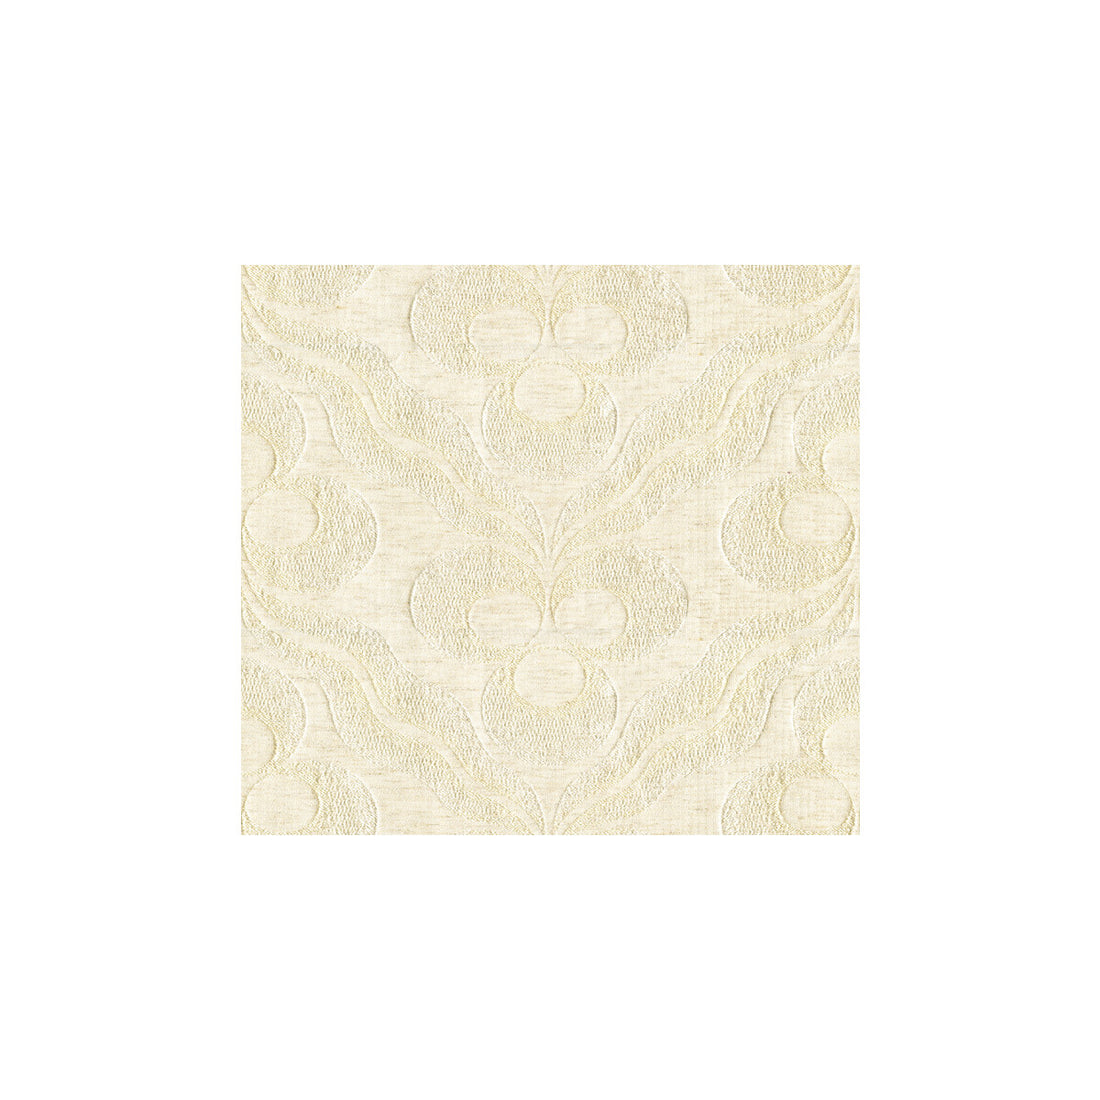 Topkapi Spot fabric in blanc color - pattern 30175.1.0 - by Kravet Couture in the Modern Colors II collection